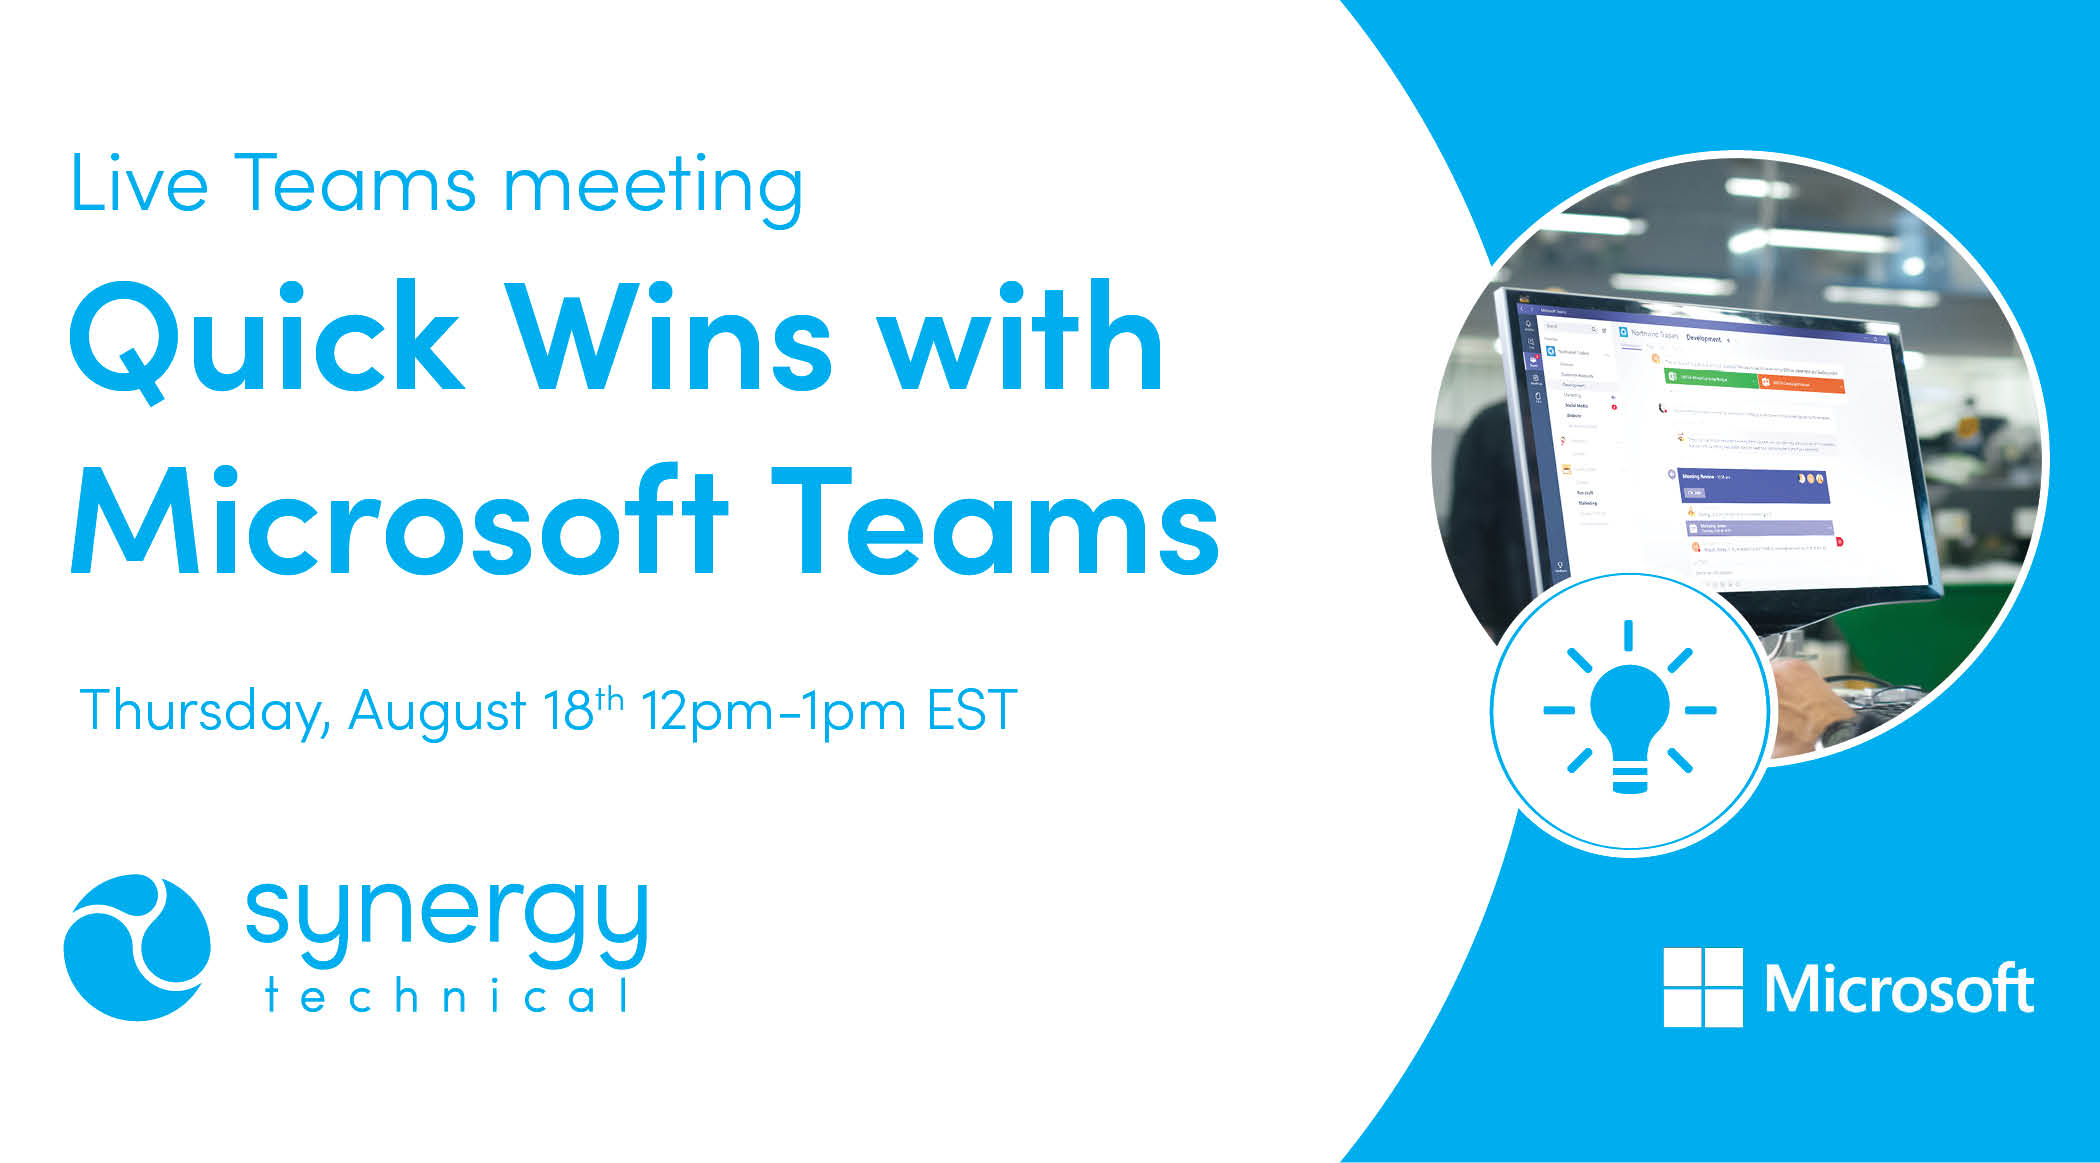 Quick Wins with Microsoft Teams